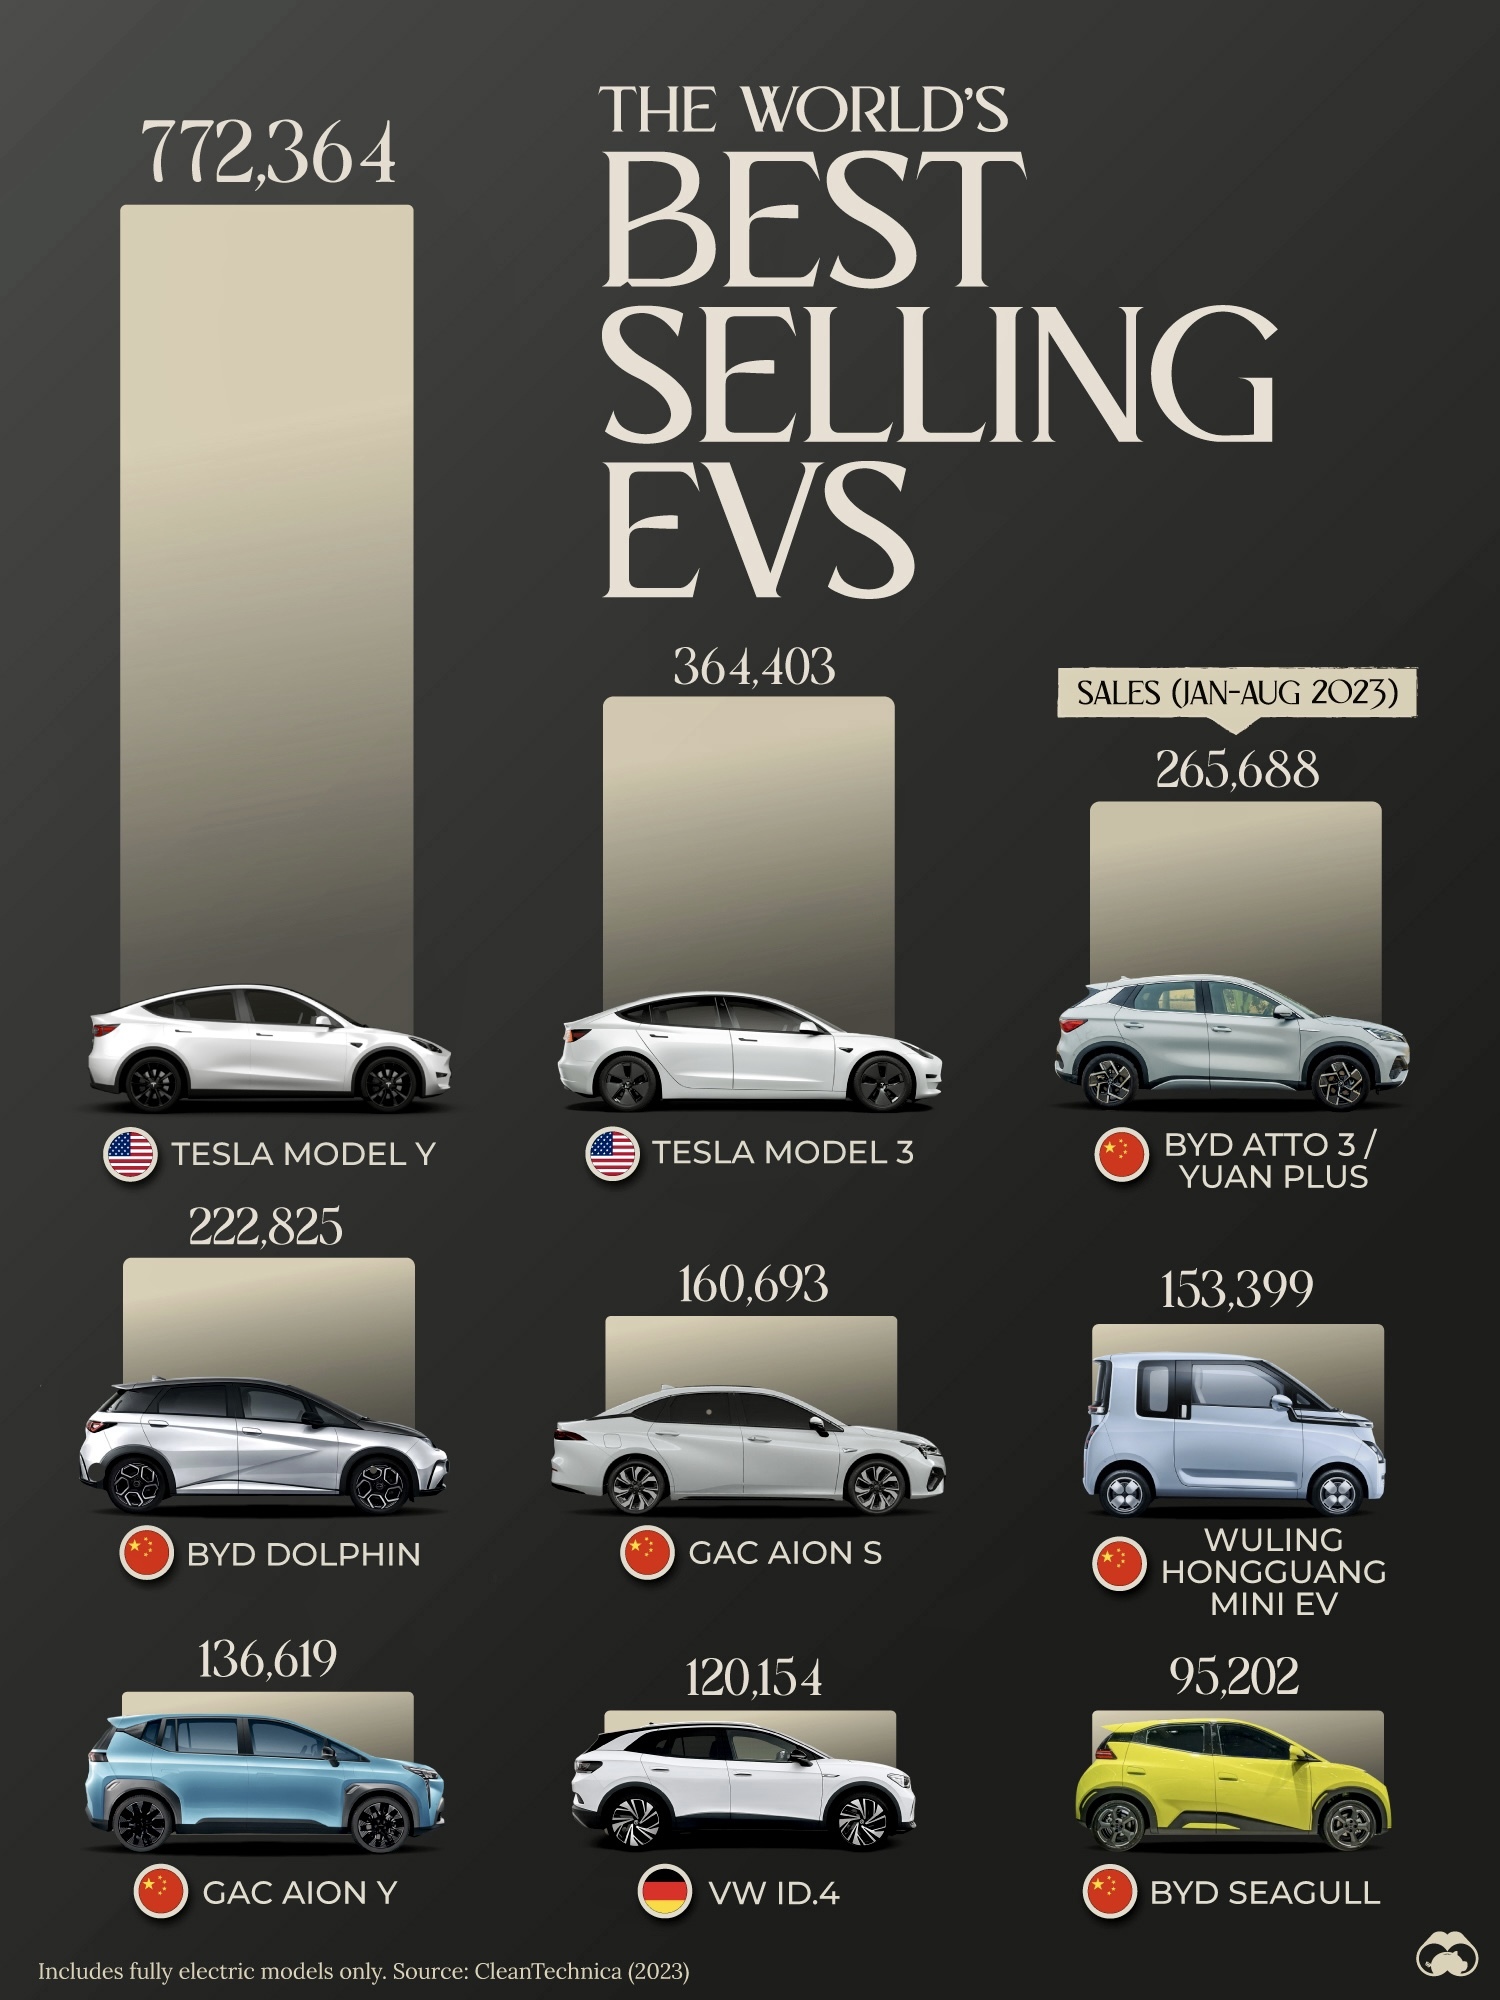 Visualized: The Highest Electric Vehicle Sales, by Model